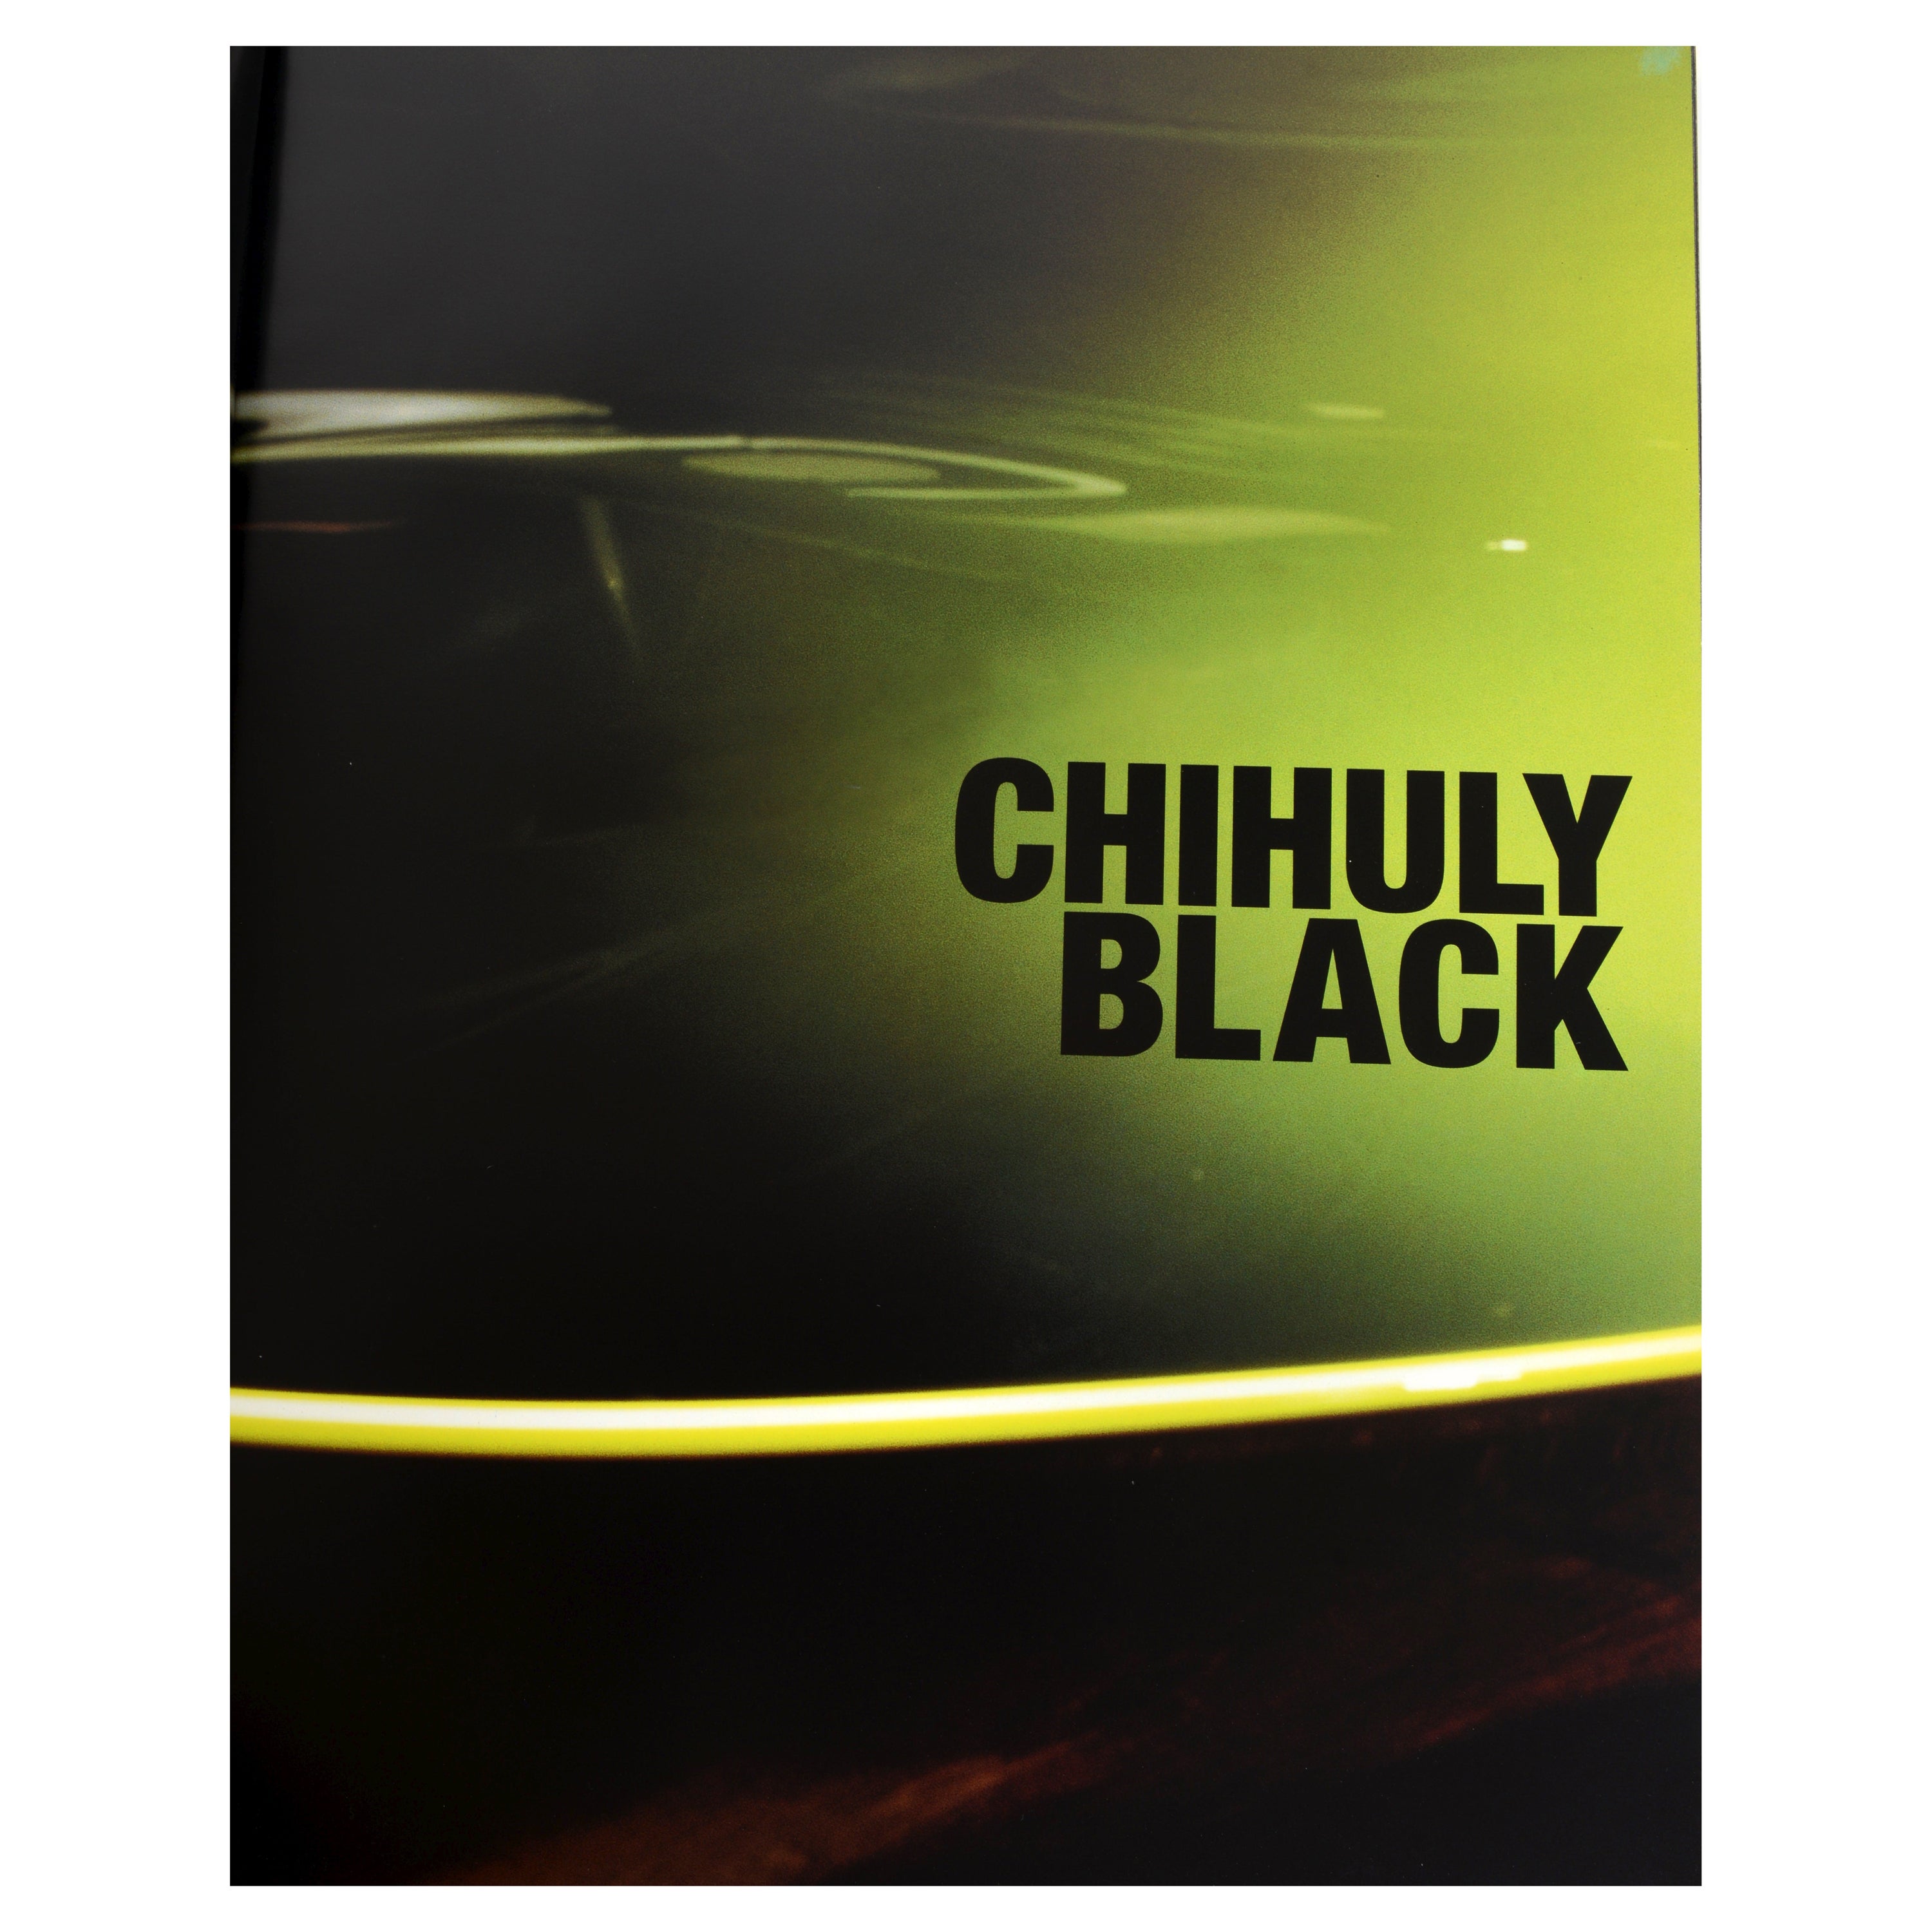 Chihuly Black by Dale Chihuly, Dedicated to, Anne Gould Hauberg 1st Ed For Sale